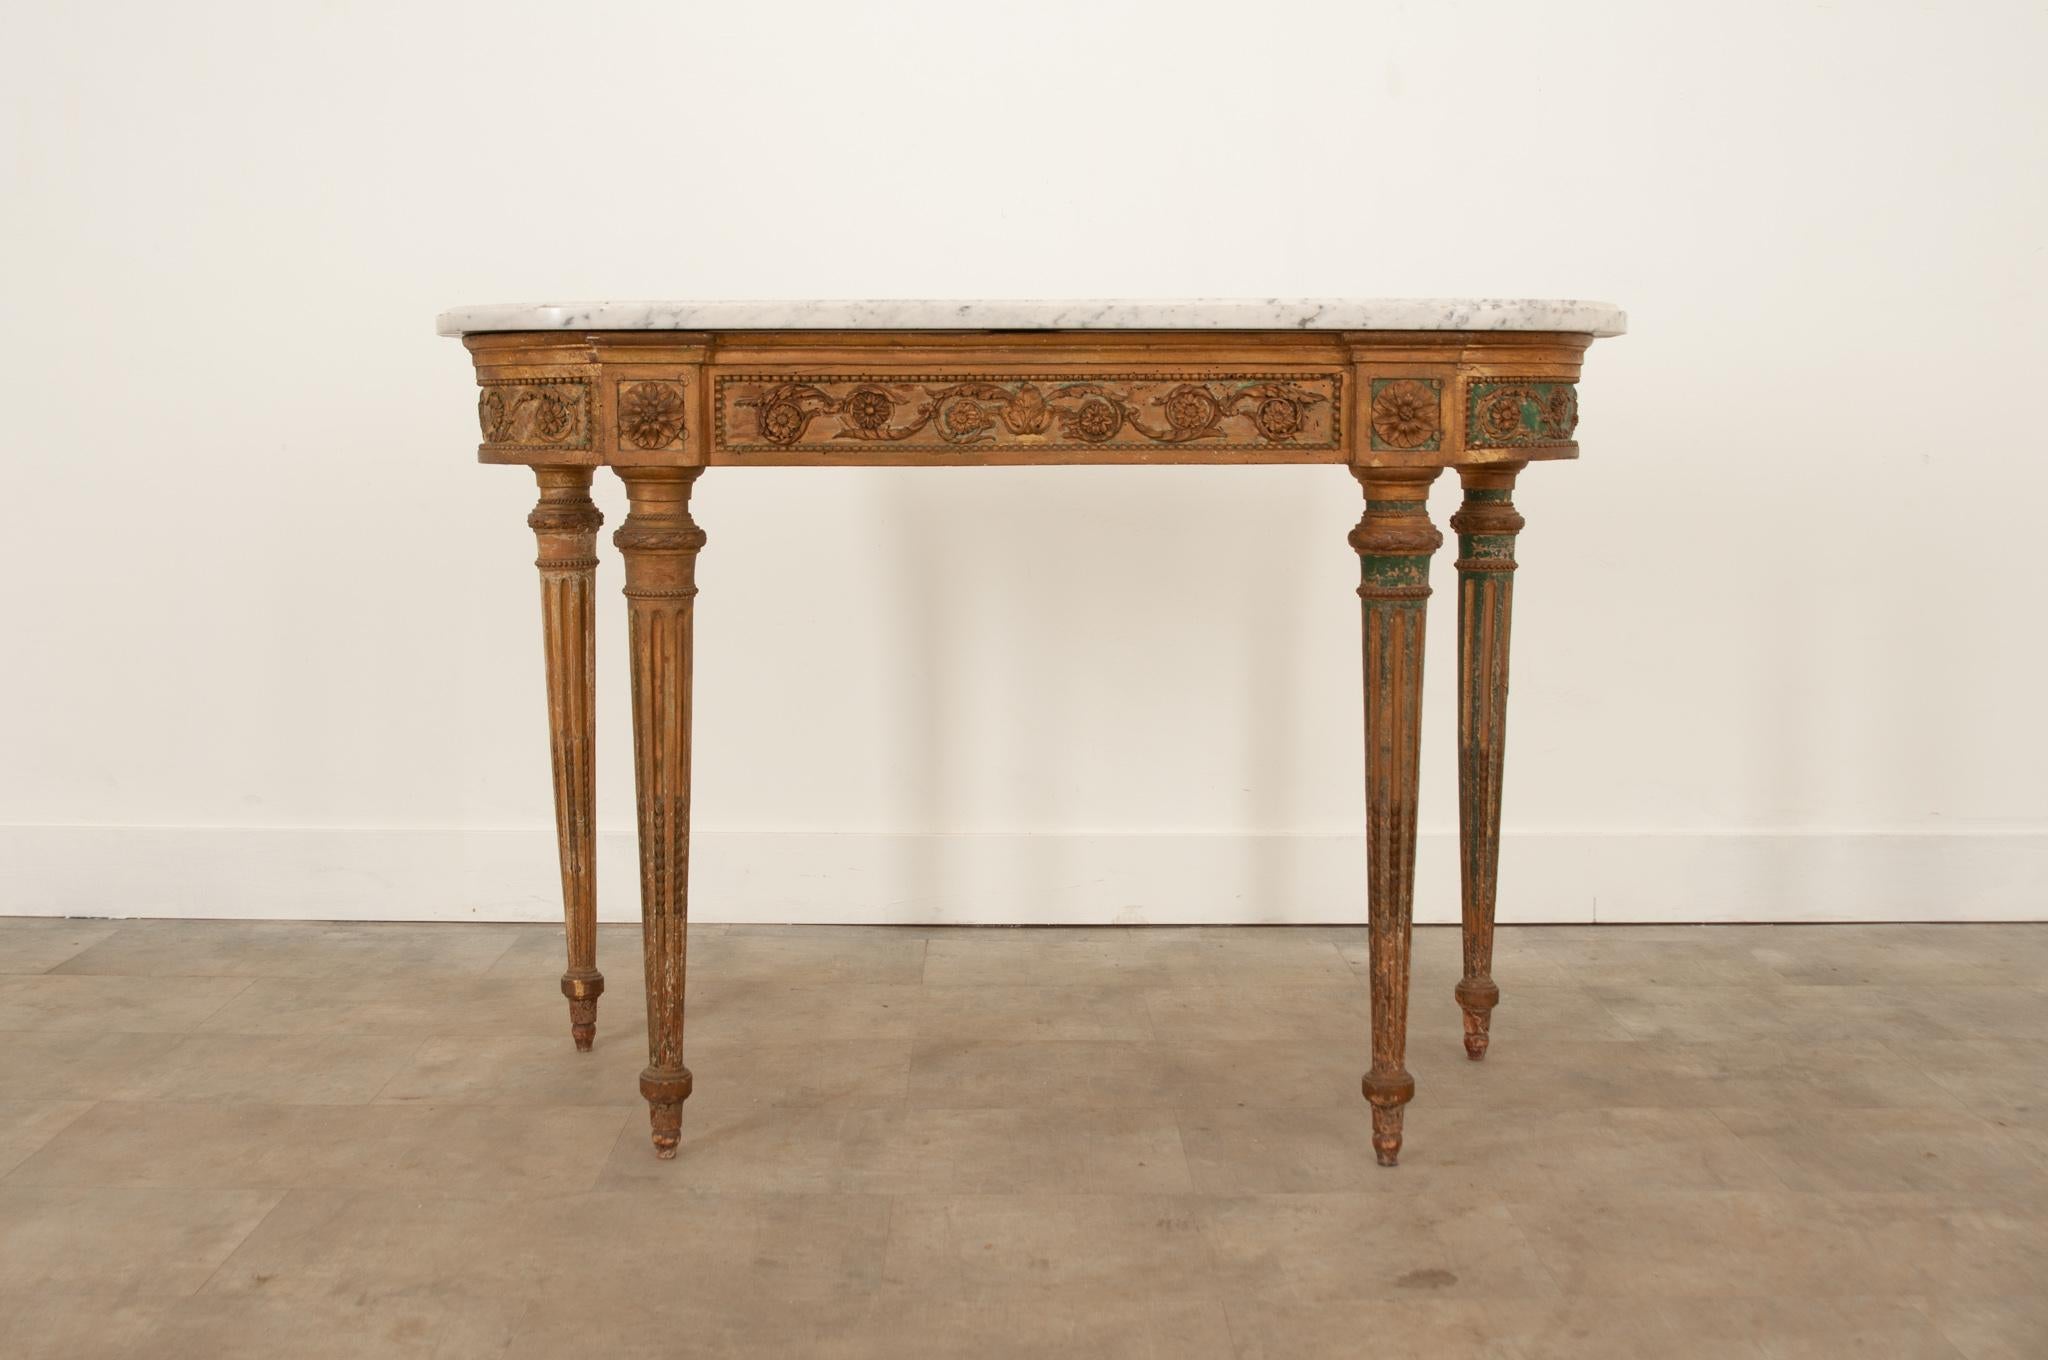 A show stopping painted demilune console table from Italy, circa 1870. The shaped marble top is in great antique condition. The gilt and green paint is worn in just the right way to add an air of old world charm. Rose and acanthus carvings adorn the